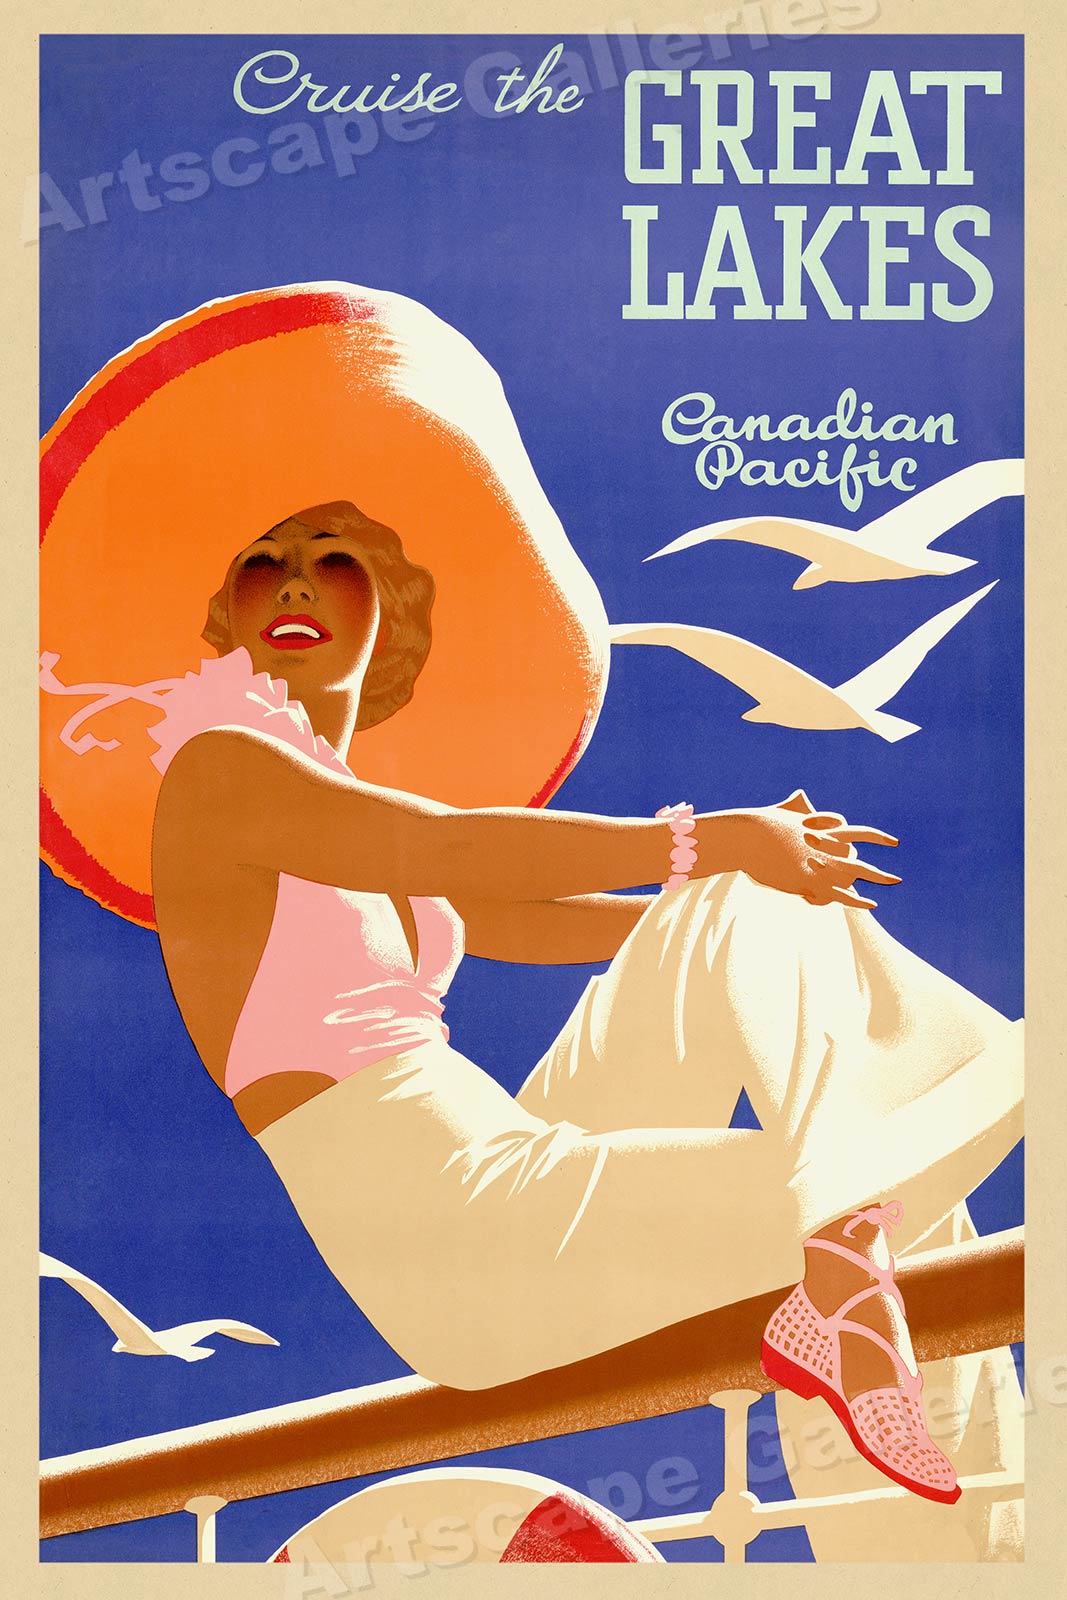 1930s travel posters